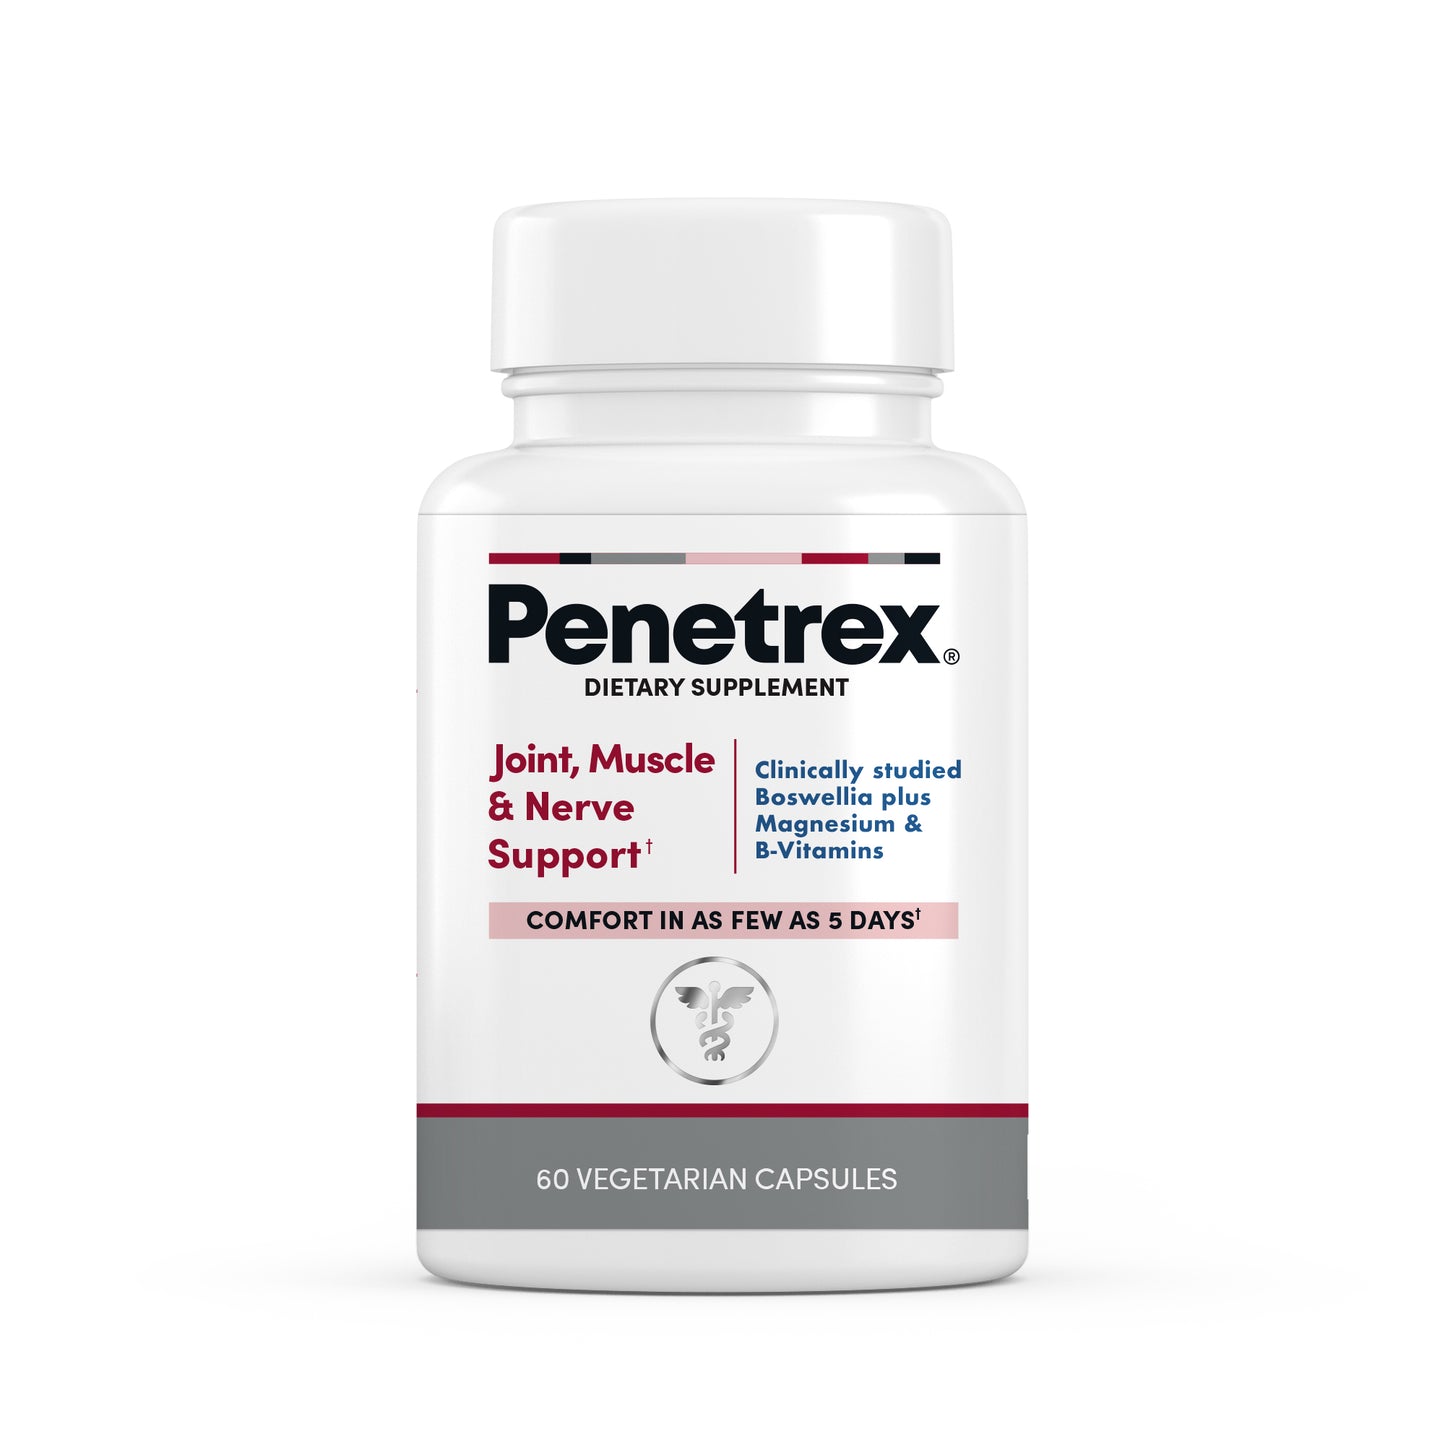 NEW Penetrex Joint, Muscle & Nerve Support Supplement, 30 Day Supply (60 count)